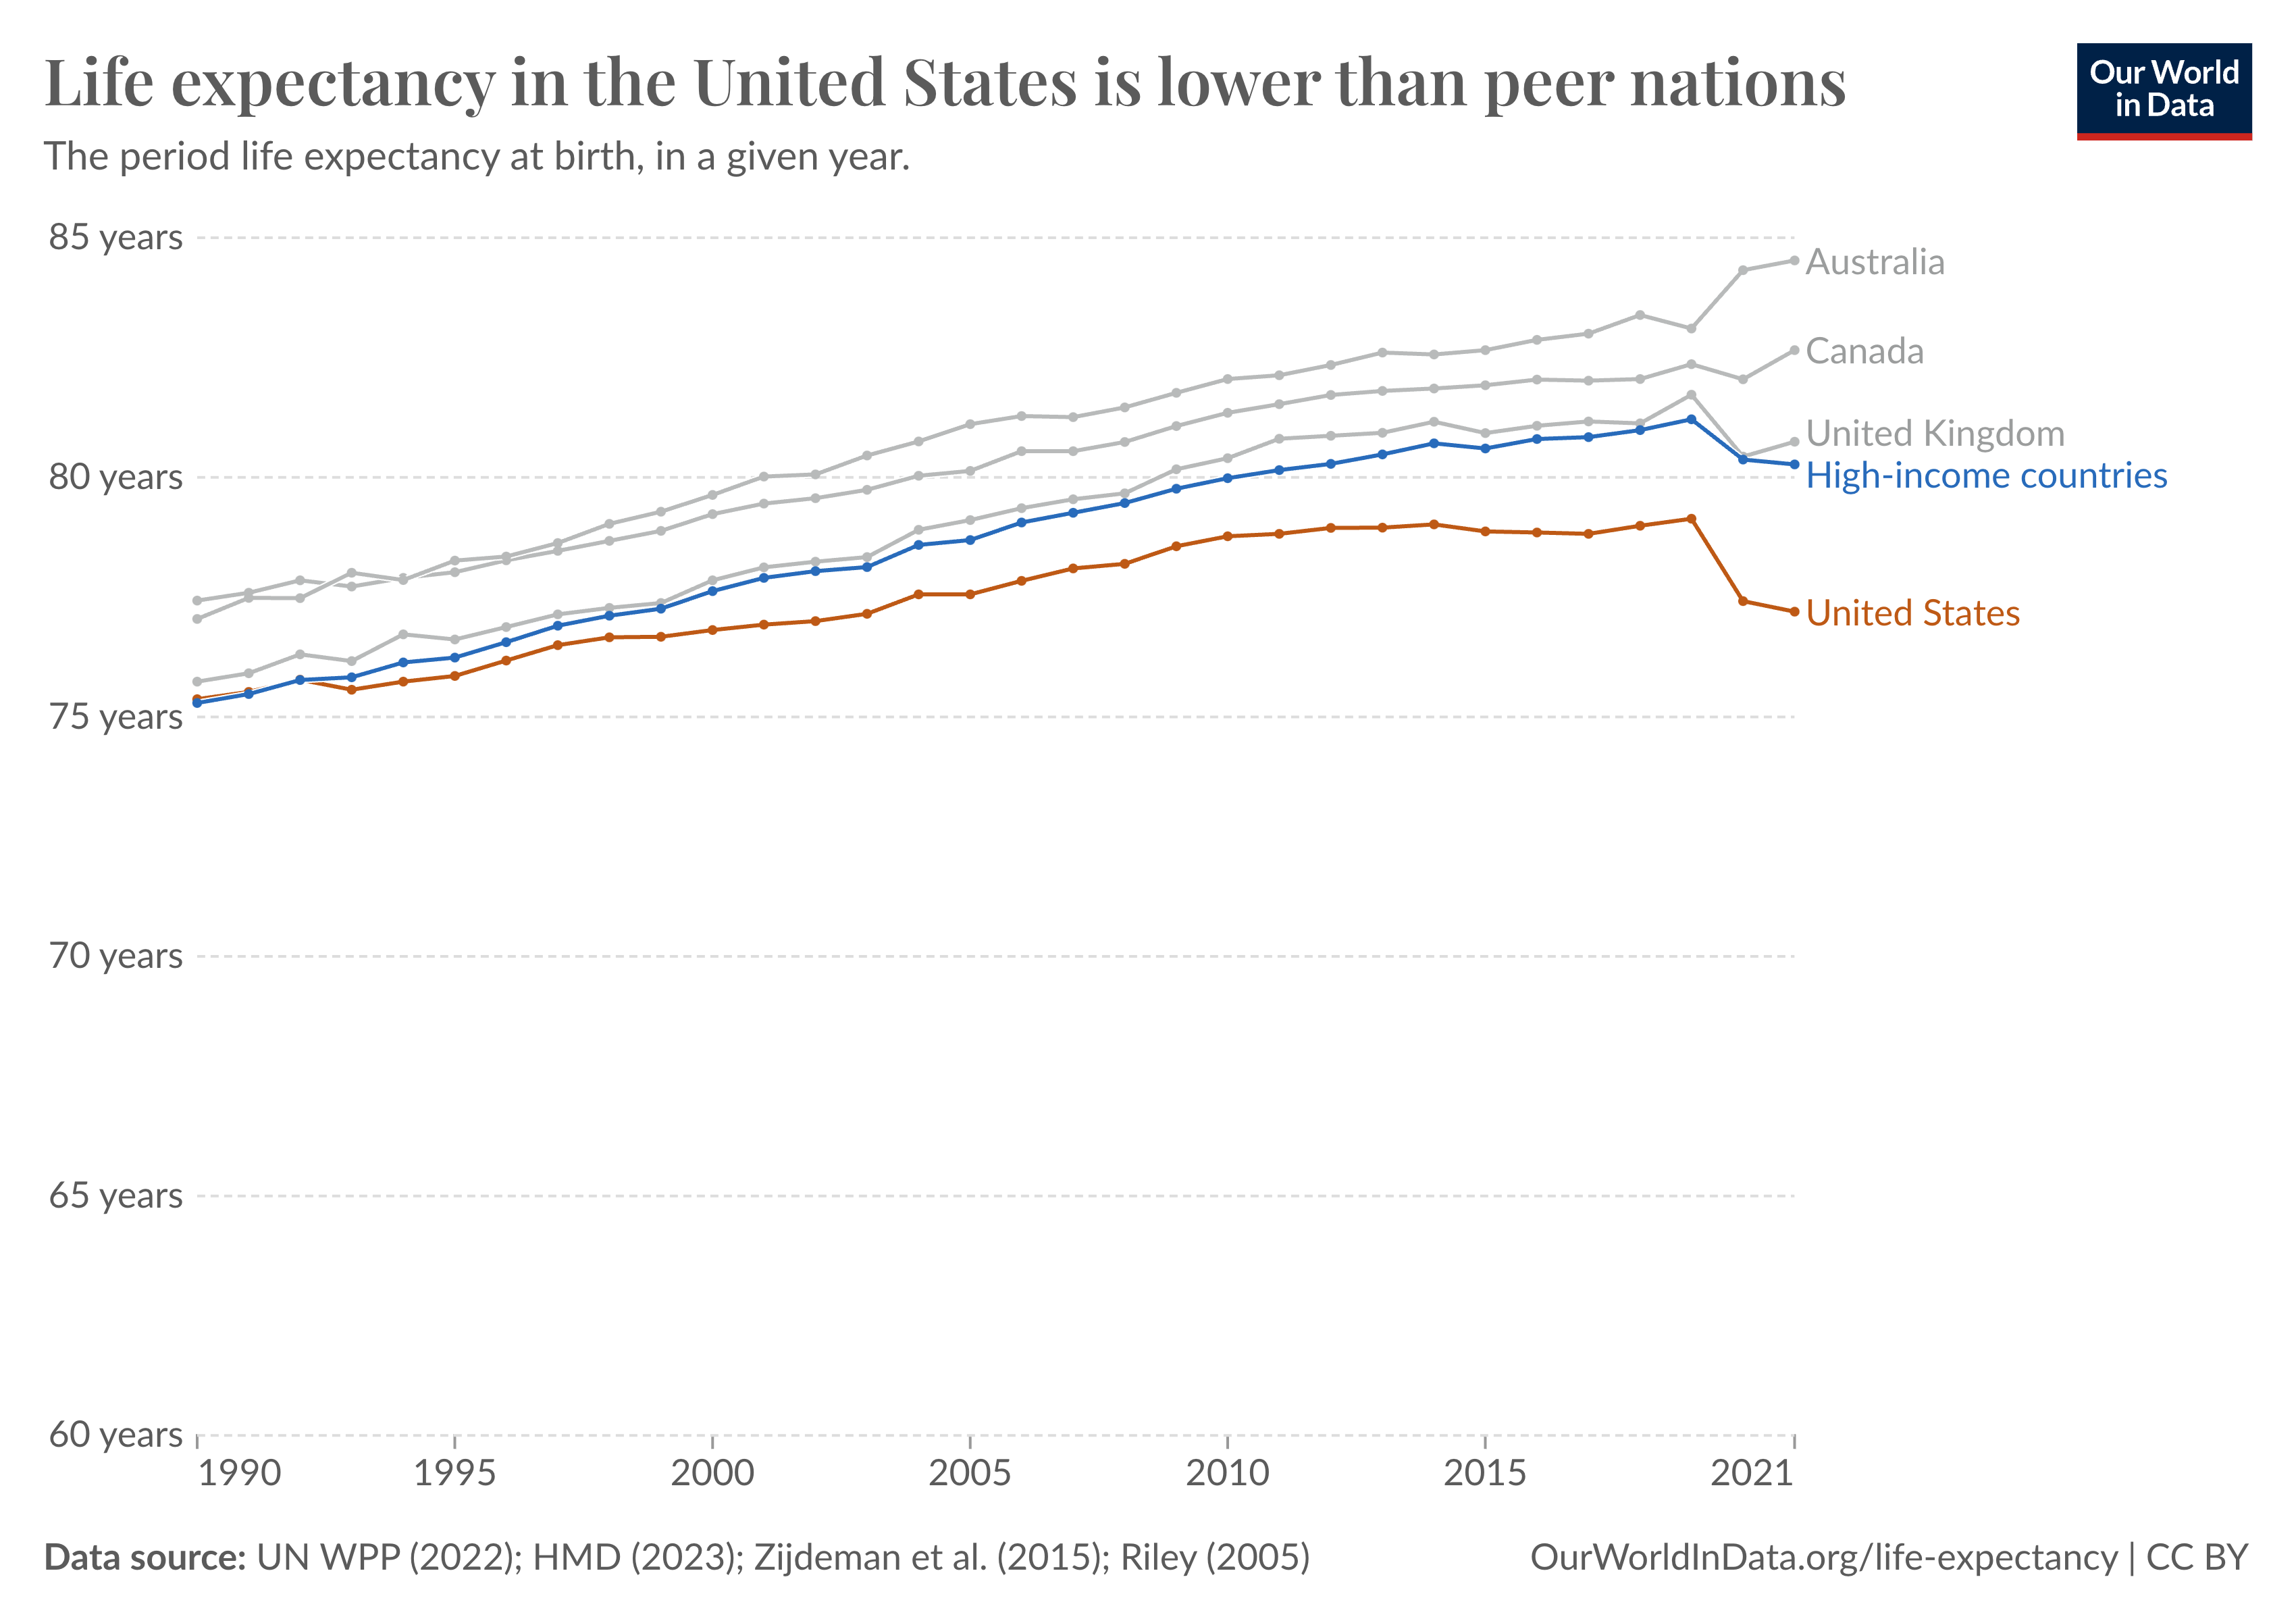 A line graph titled “Life expectancy in the United States is lower than peer nations” shows life expectancy from 1990 to 2021. The y-axis ranges from 60 to 85 years. The graph compares the United States (orange line) with Australia (green), Canada (blue), the United Kingdom (purple), and high-income countries (teal). The U.S. consistently has lower life expectancy, with a widening gap over time. Data sources: UN WPP (2022), HMD (2023), Zijdeman et al. (2015), Riley (2005). Credit: Our World in Data.